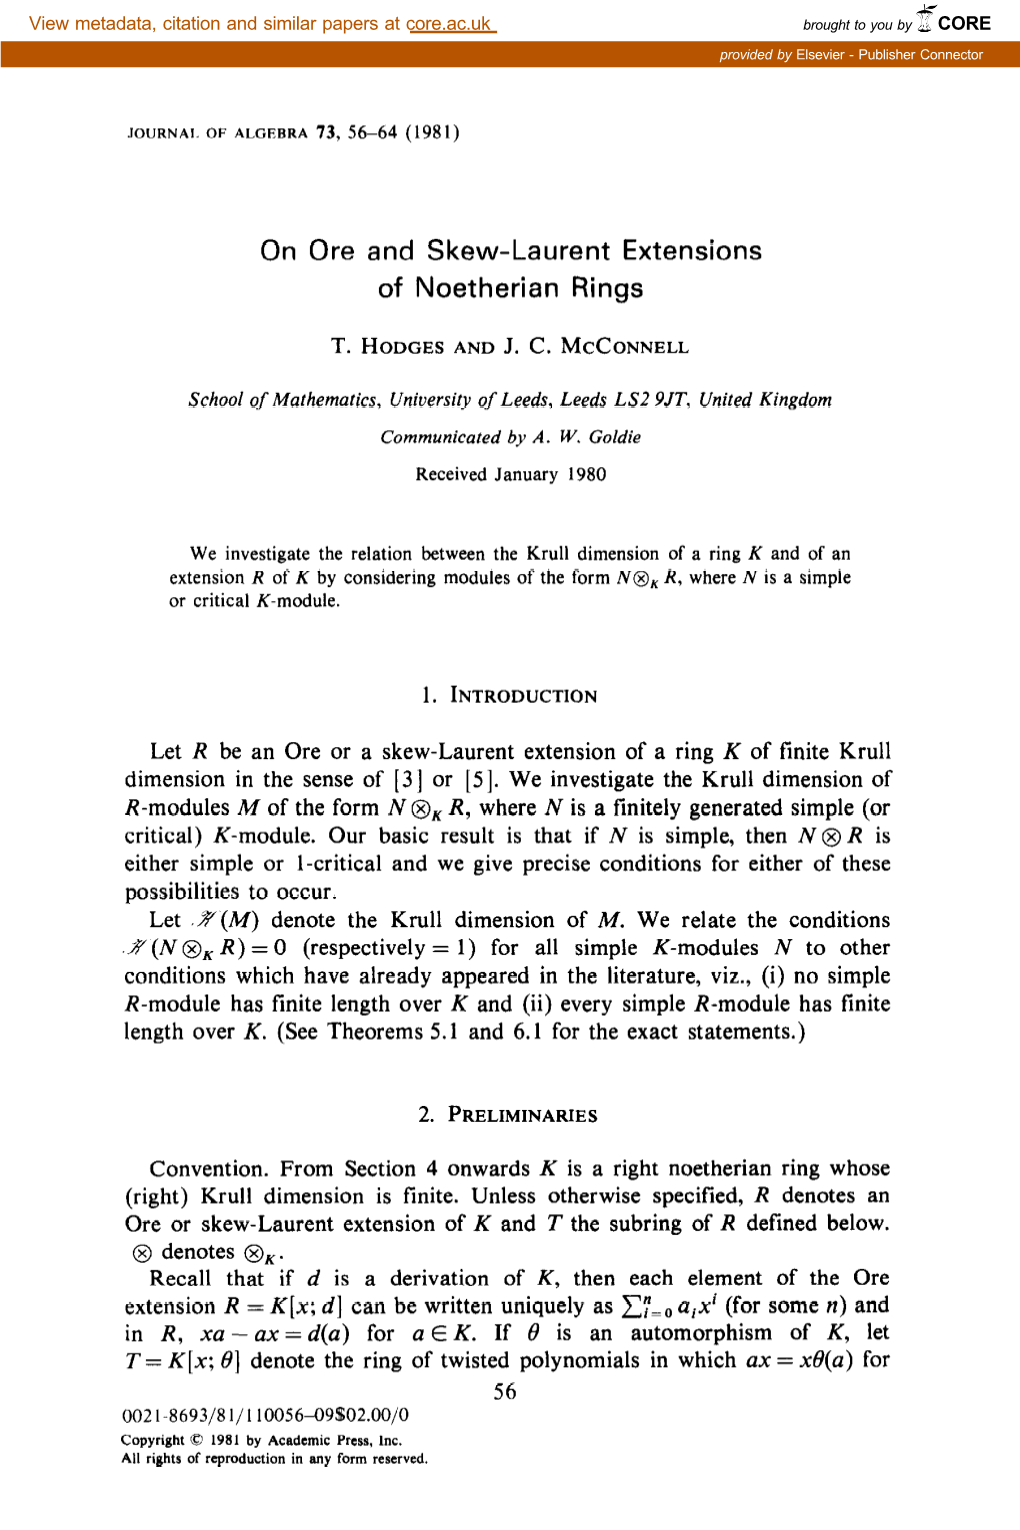 On Ore and Skew-Laurent Extensions of Noetherian Rings